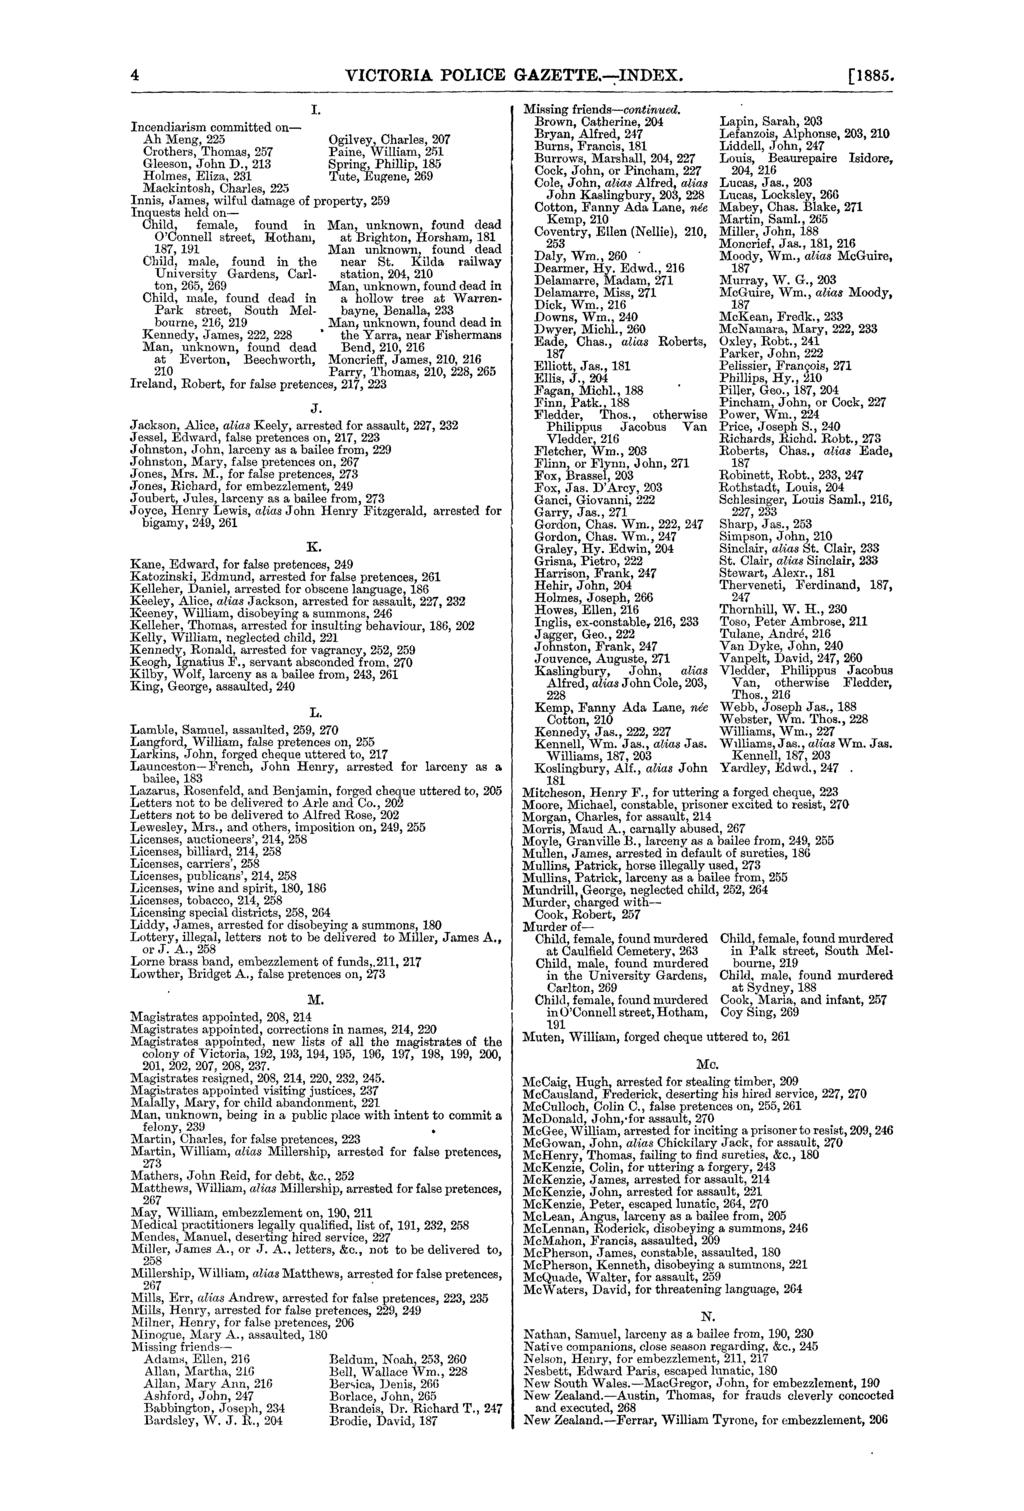 4 VICTORIA POLICE GAZETTE. ;INDEX. [1885. 1. Incendiarism committed on- Ali Meng, 225 Ogilvey, Charles, 207 Crothers, Thomas, 257 Paine, William, 251 Gleeson, John D.